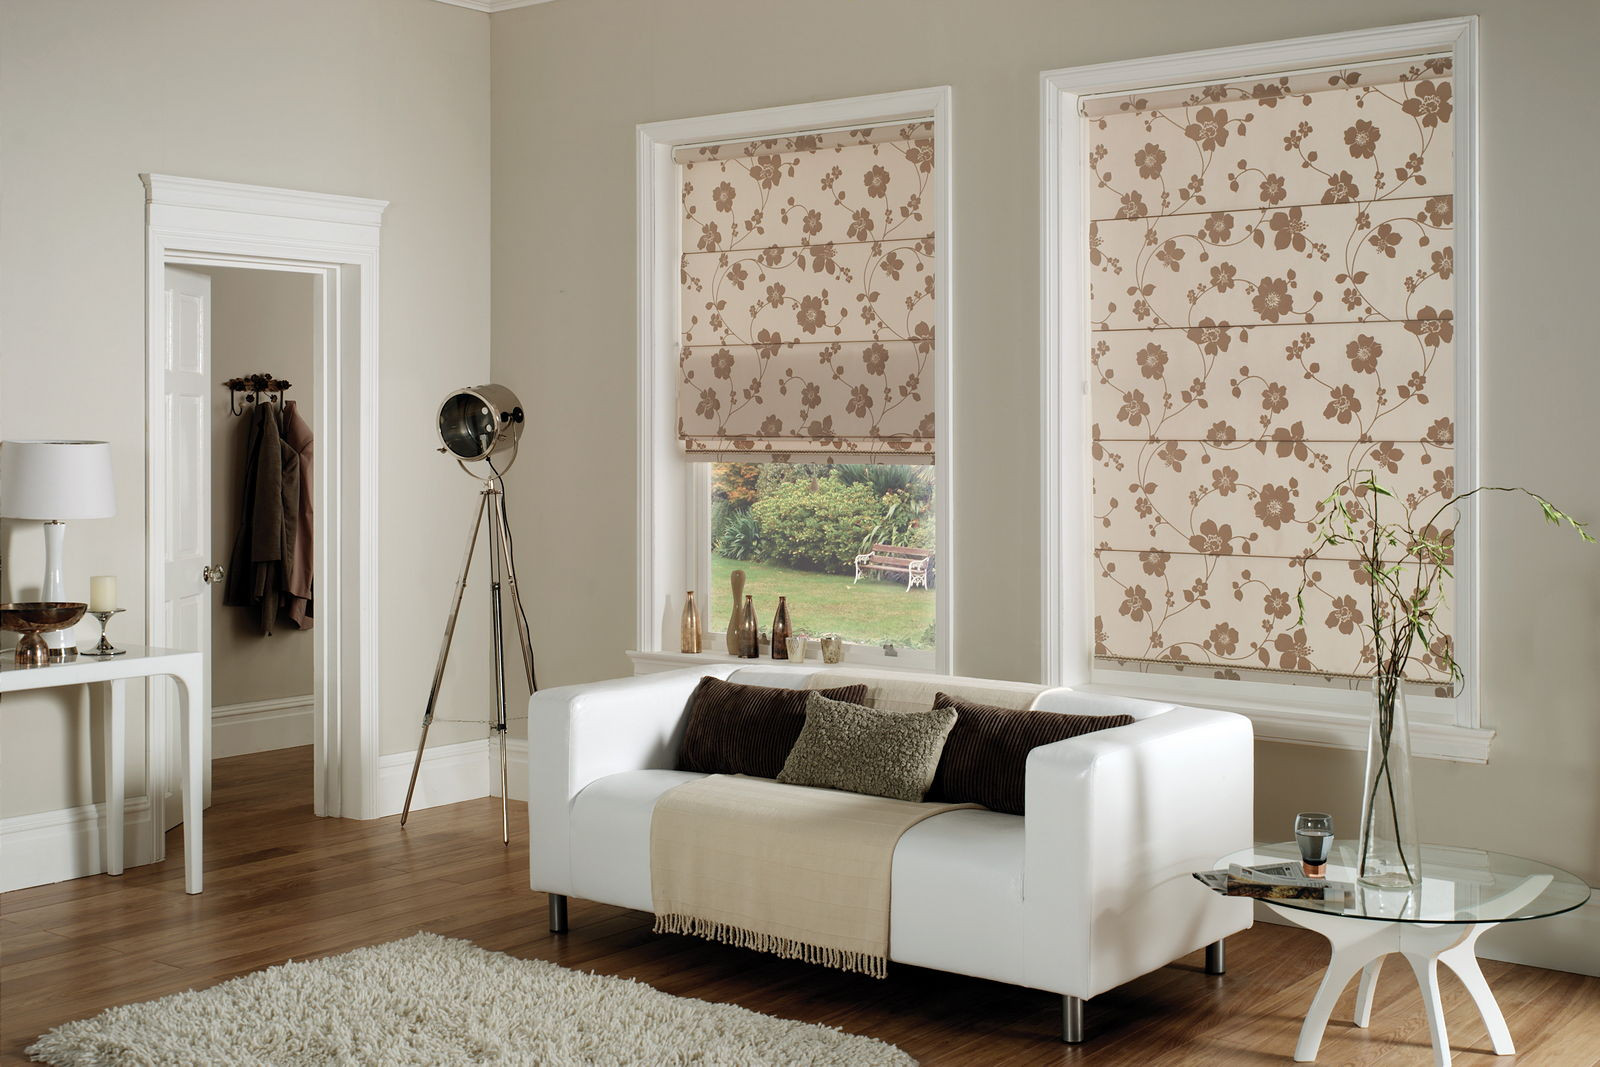 Living Room Drapes Ideas
 Living Room Curtains the best photos of curtains design